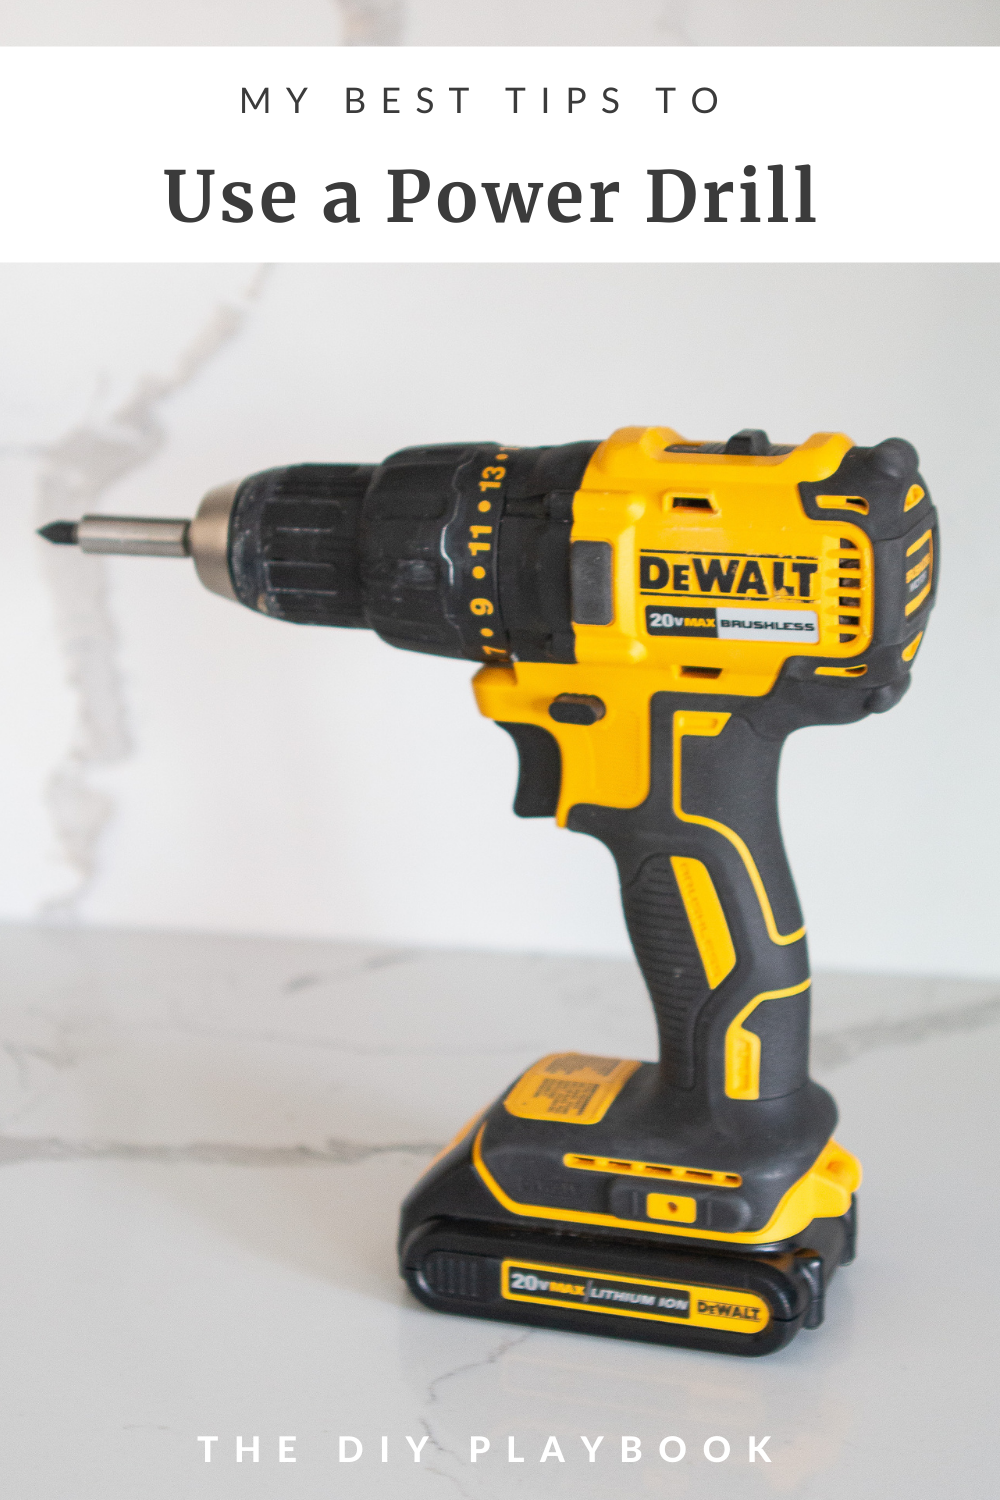 How to use a power drill